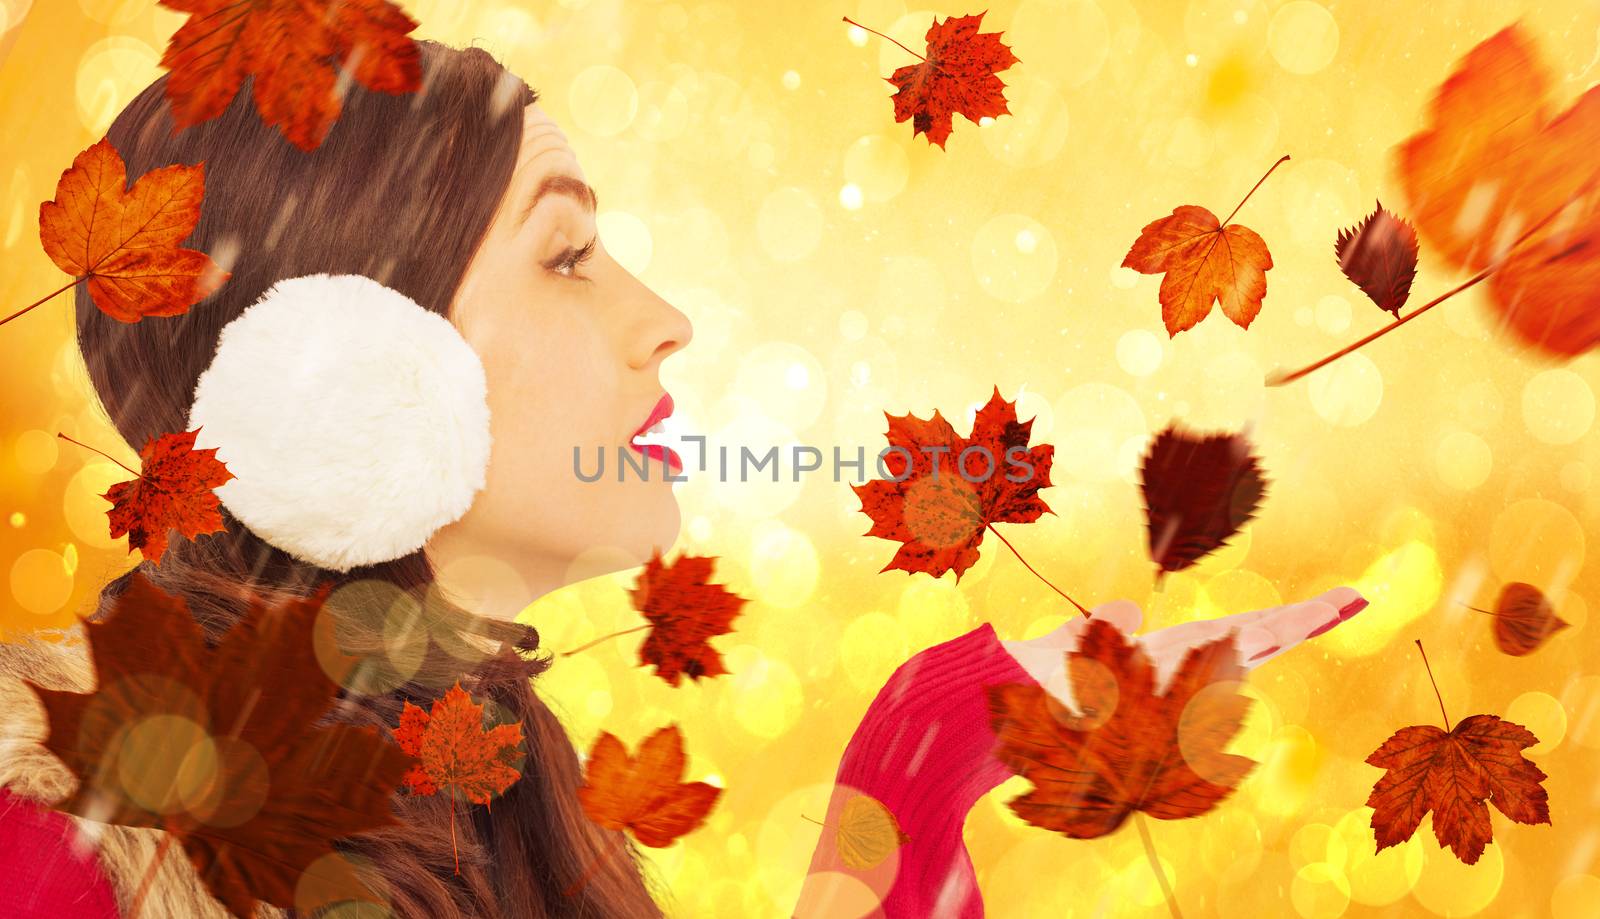 Composite image of brunette in winter clothes with hand out by Wavebreakmedia